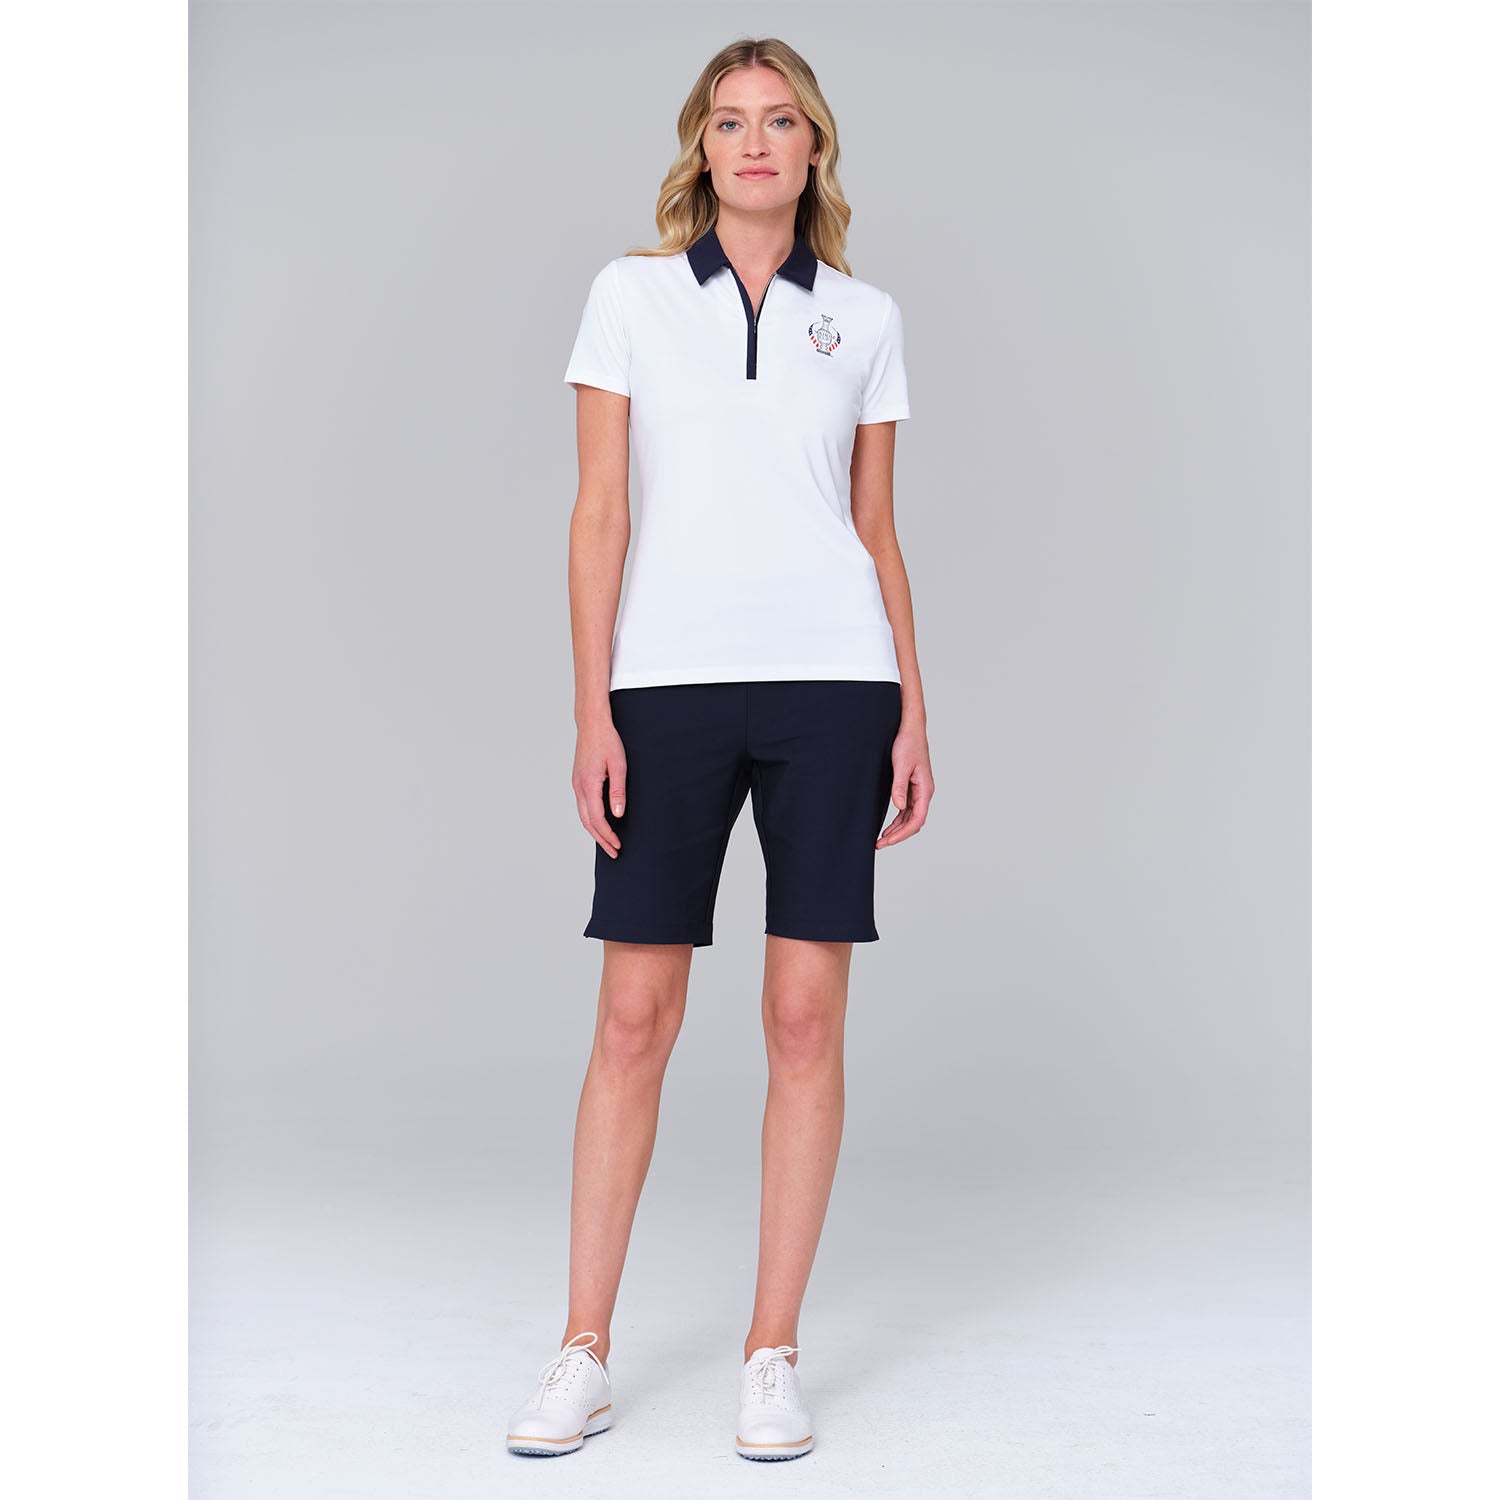 Dunning 2023 LPGA Official Solheim Cup Team Uniform Women's Short Sleeve Performance Polo in White - Lifestyle Front View